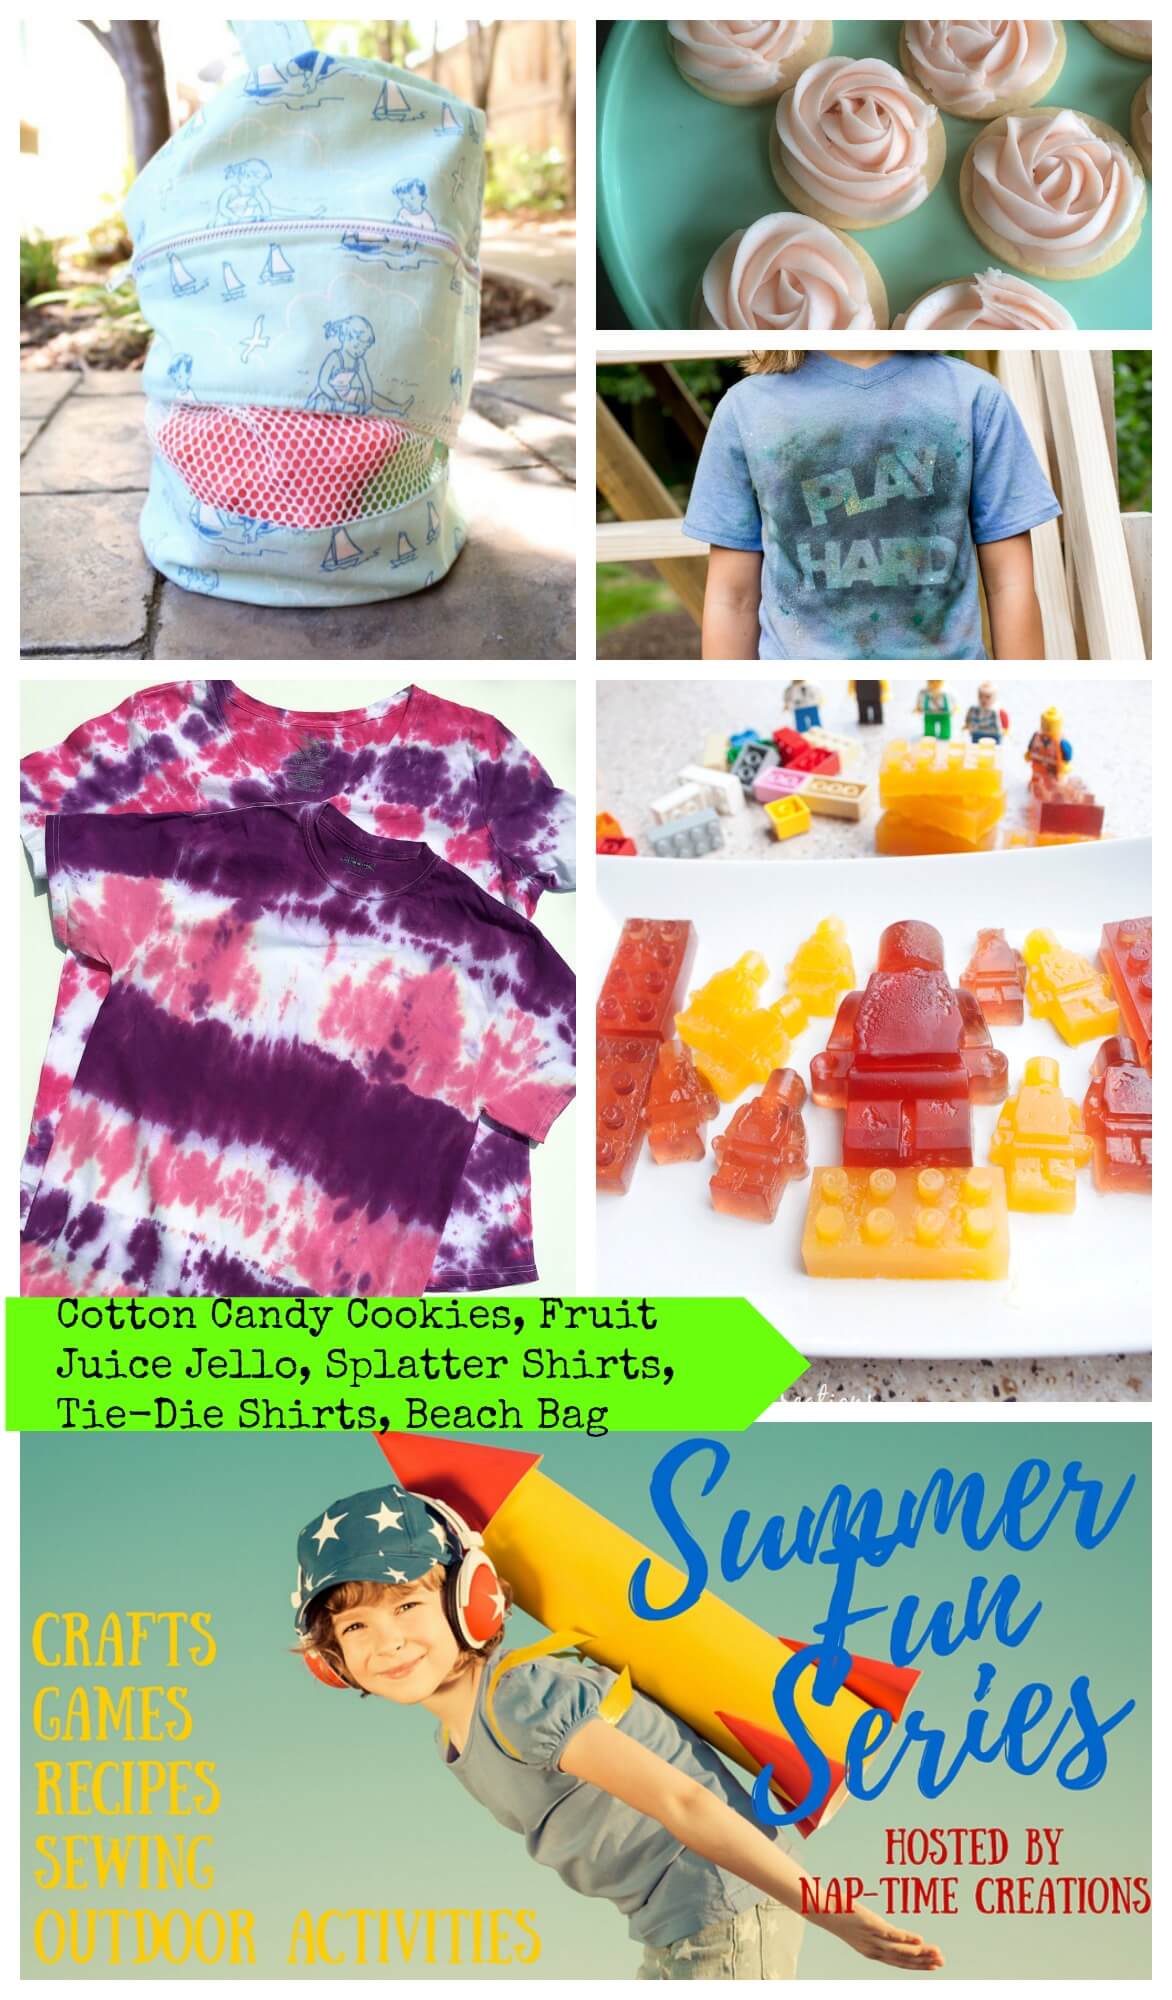 Summer Fun #1 Cotton Candy Cookies - tie dye shirts - fruit juice lego jello - Splatter shirts - Beach Bag - From Nap-Time Creations